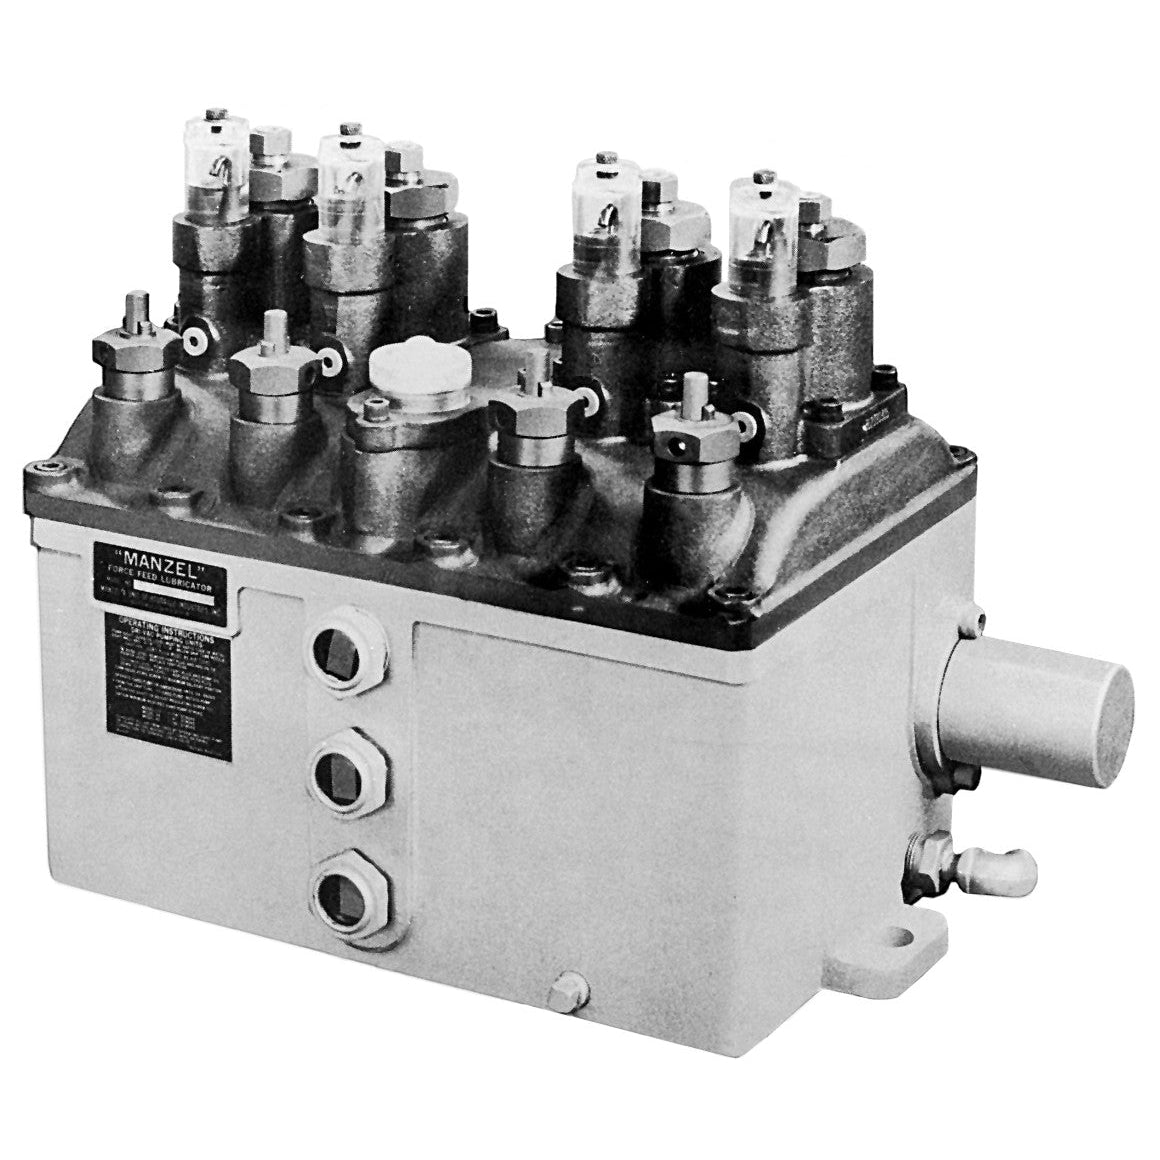 HP-50 Lubricator with 4 Pumps and Low Level